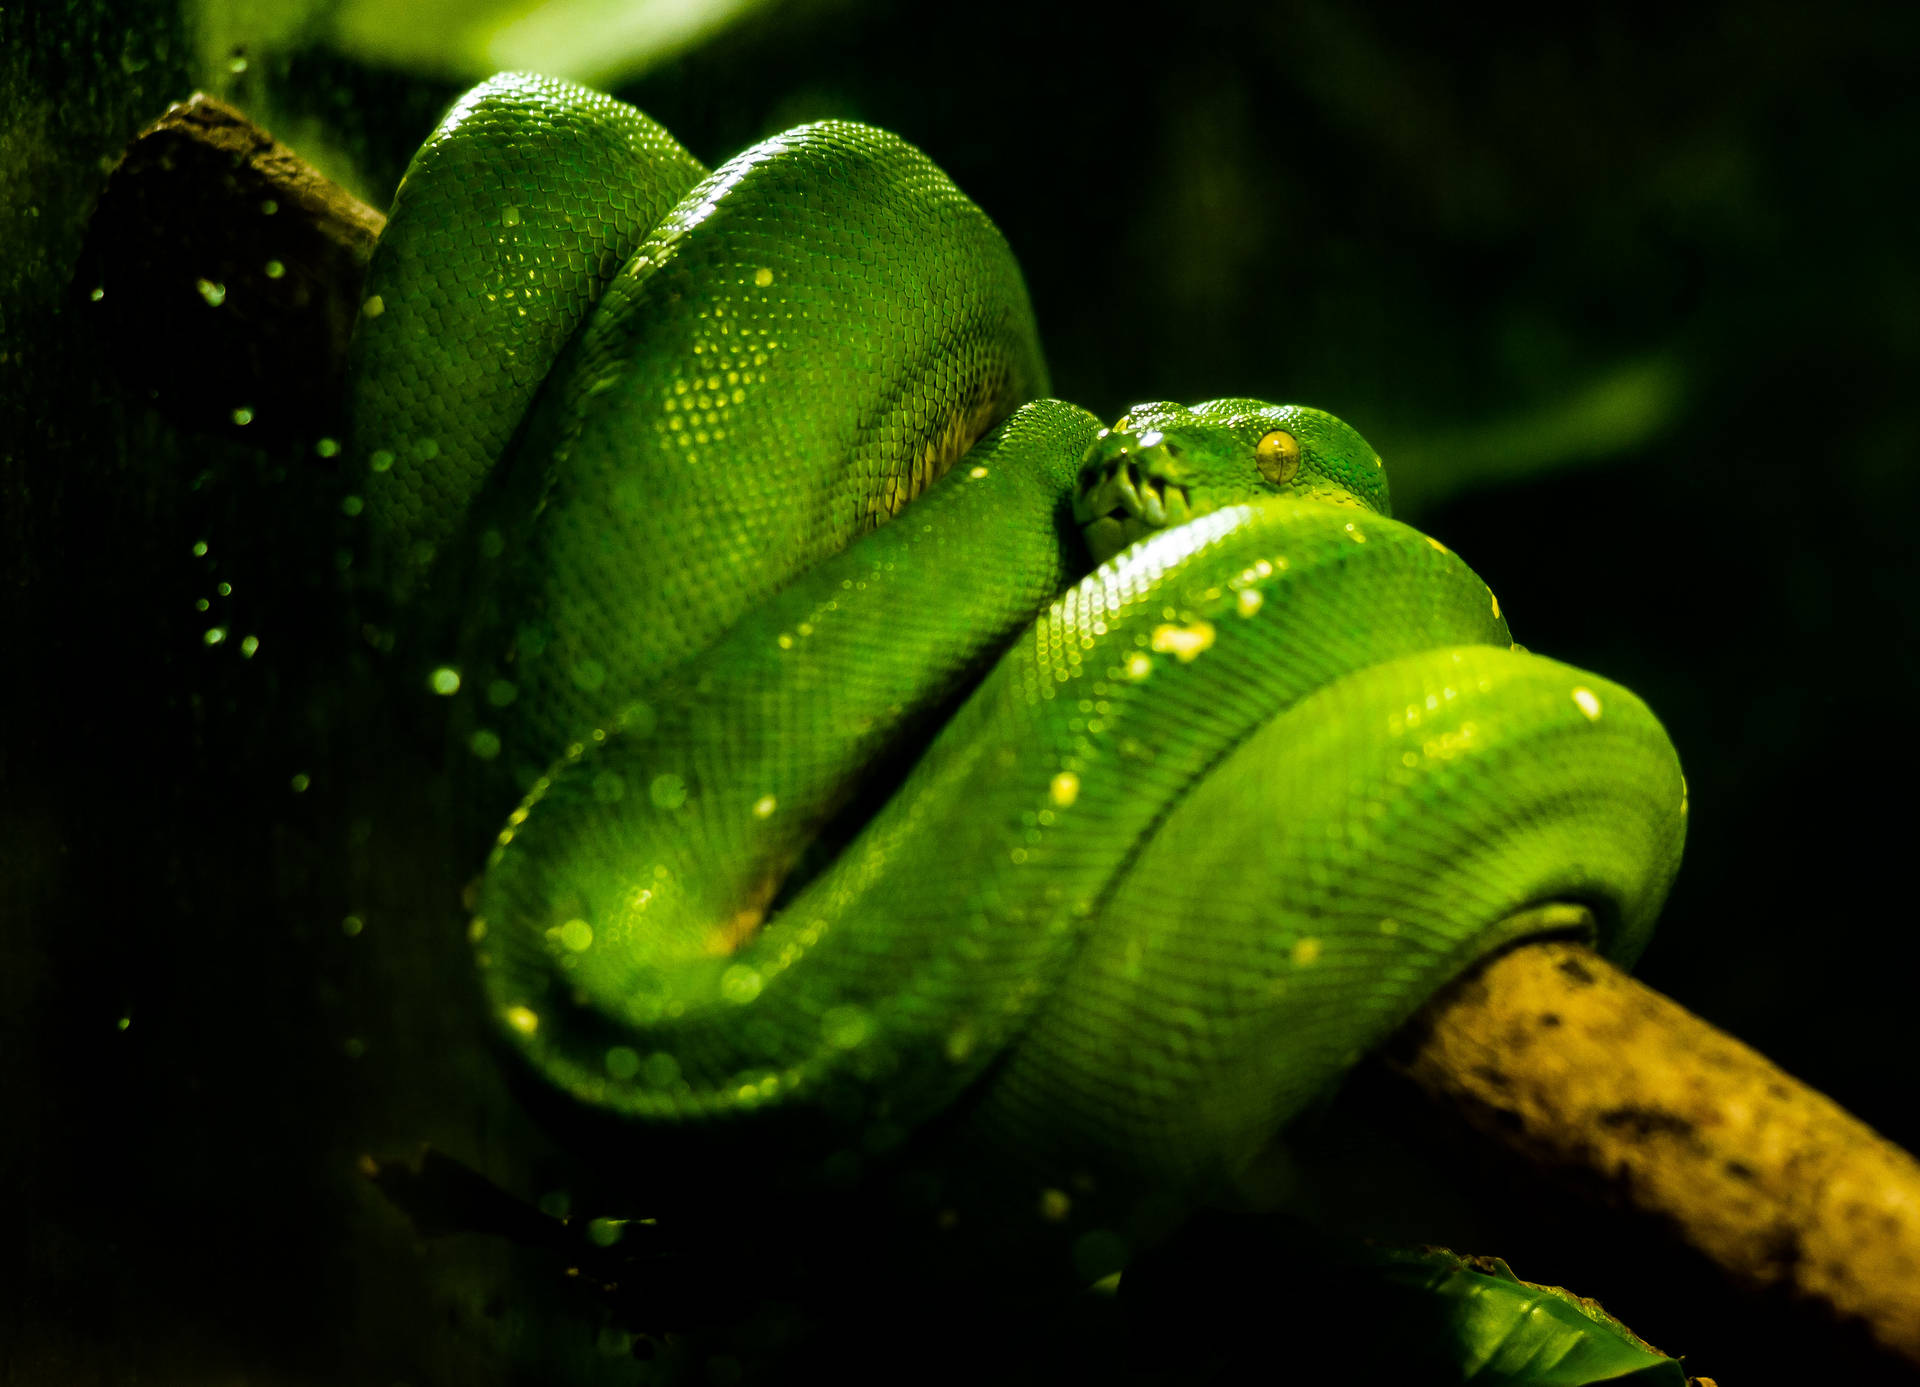 Brilliant Coiled Up Green Snake Background